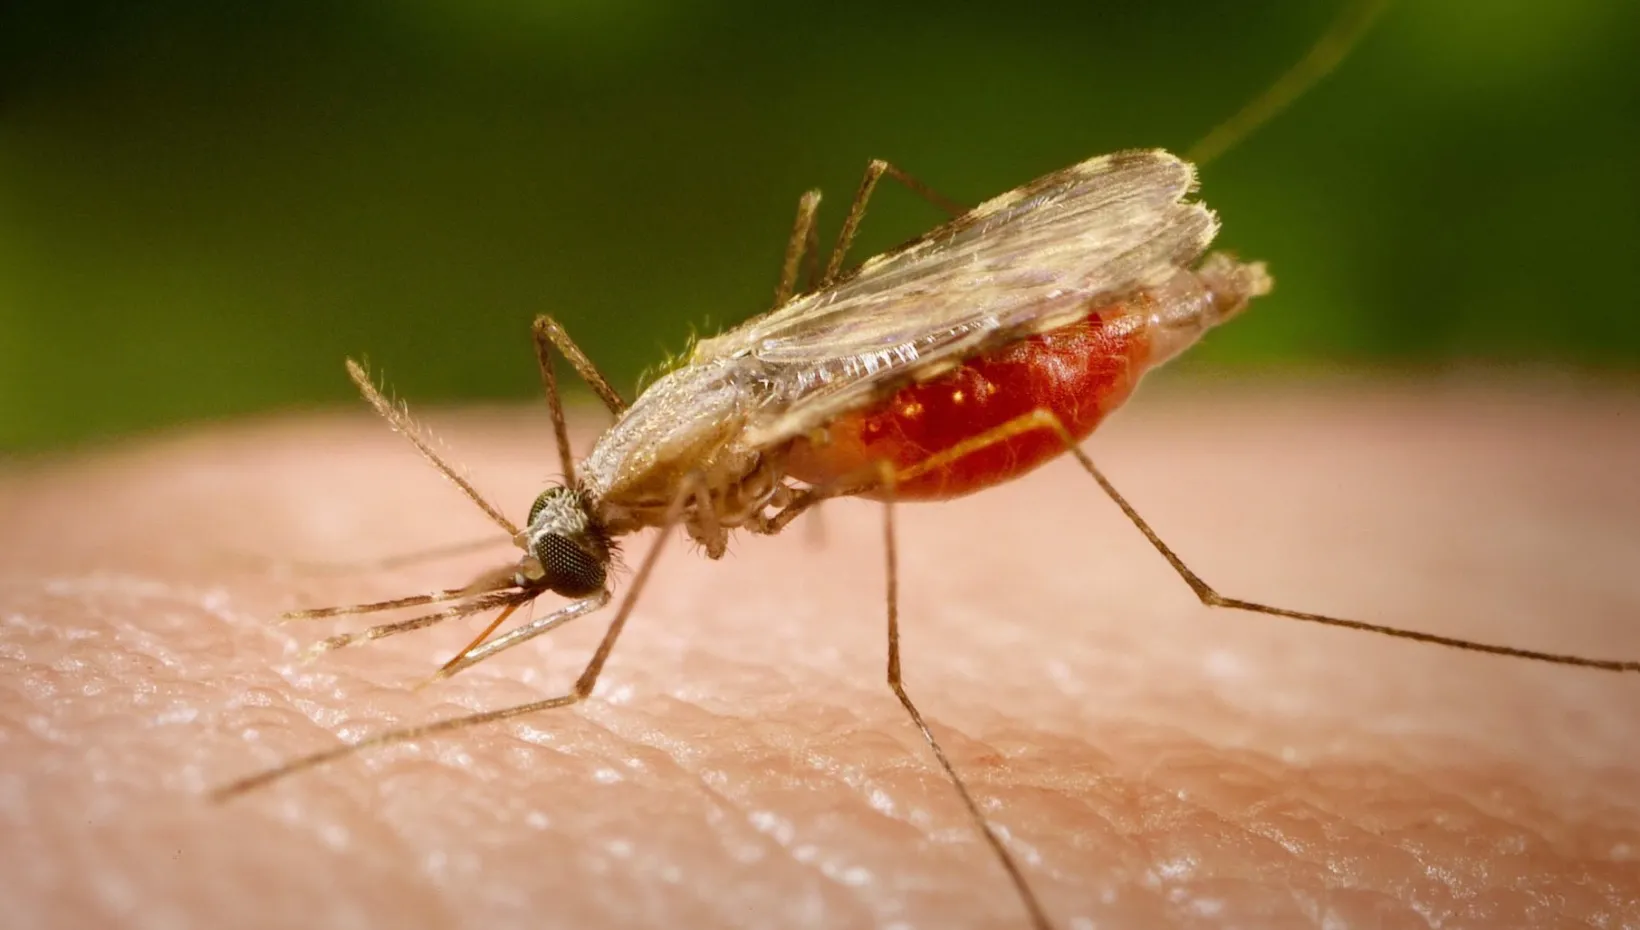 malaria article showing mosquito photo 